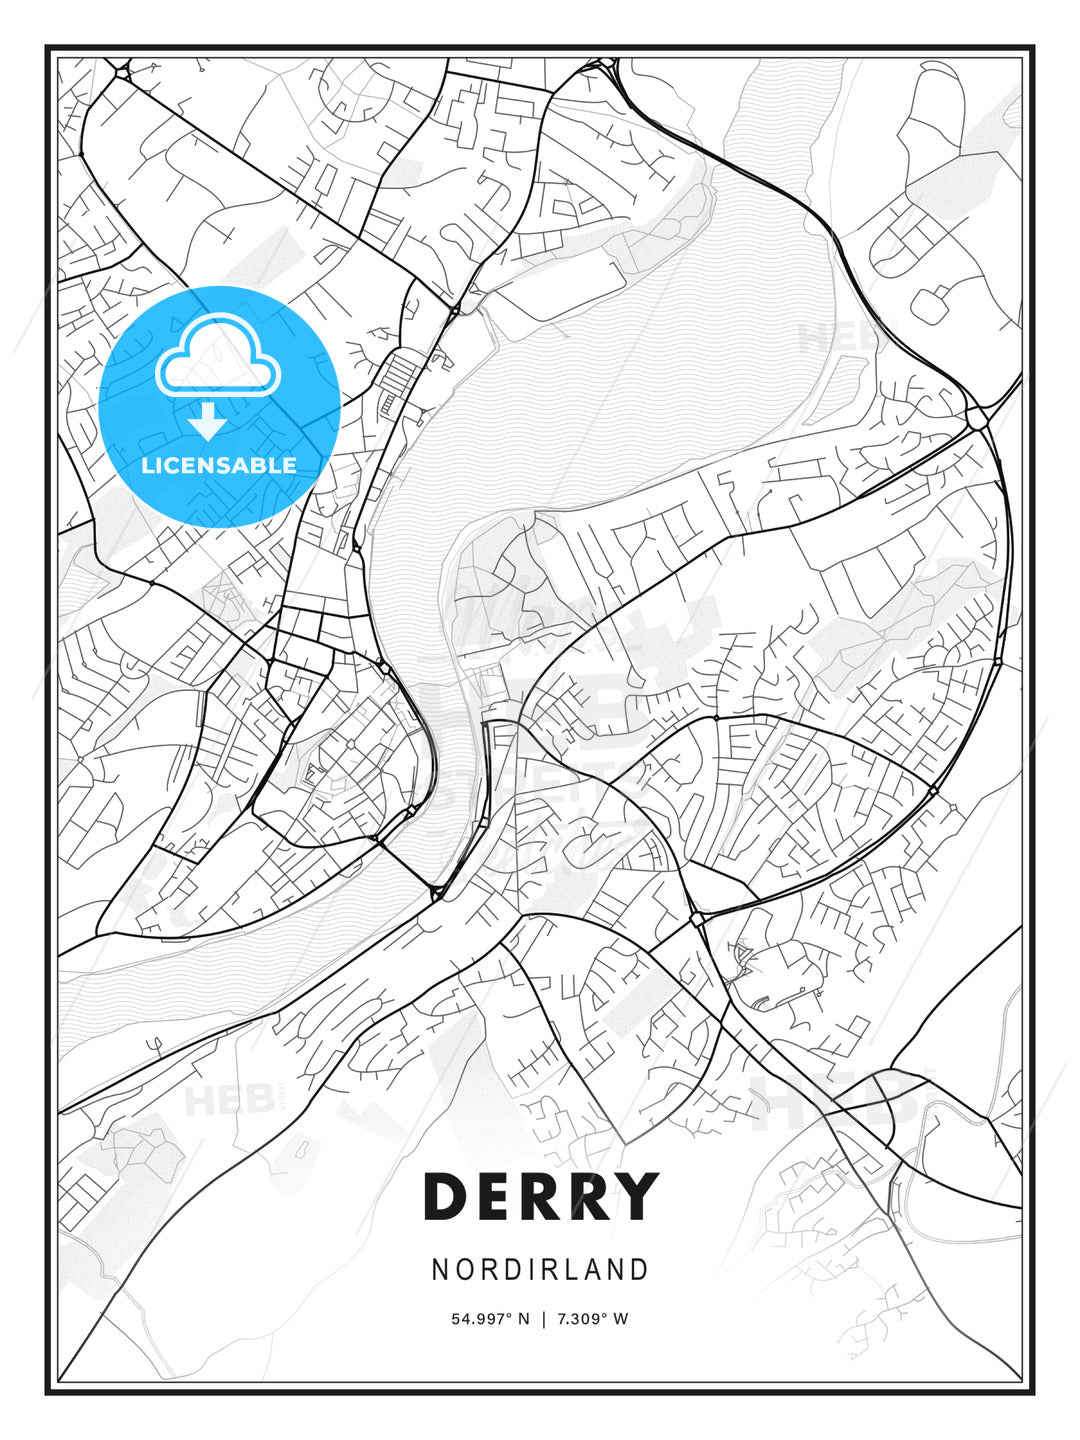 Derry, Nordirland, Modern Print Template in Various Formats - HEBSTREITS Sketches